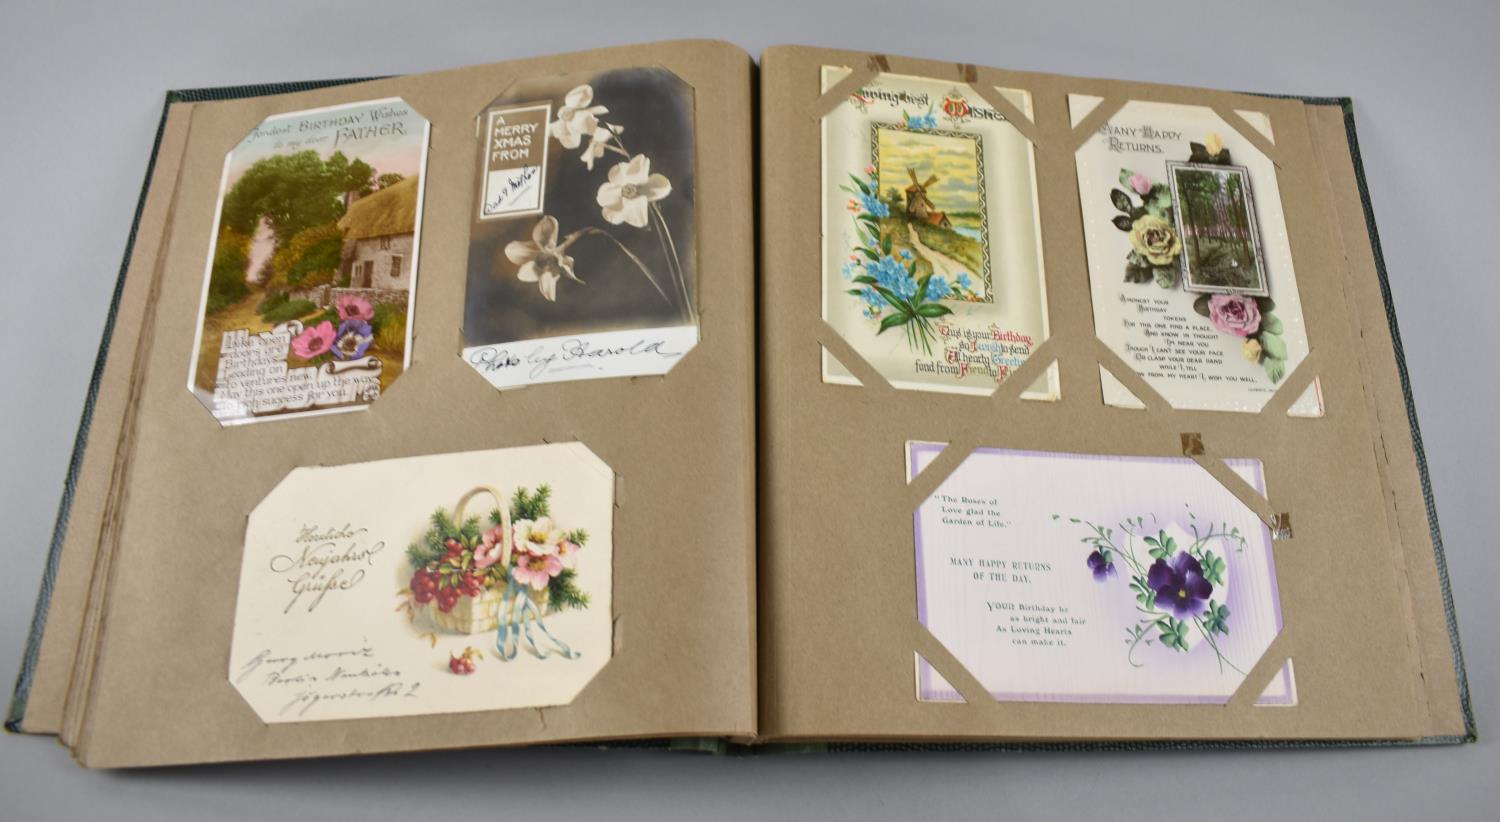 An Edwardian Postcard Album Containing Greetings Cards, Christmas Cards, Birthday Cards Etc - Image 3 of 5